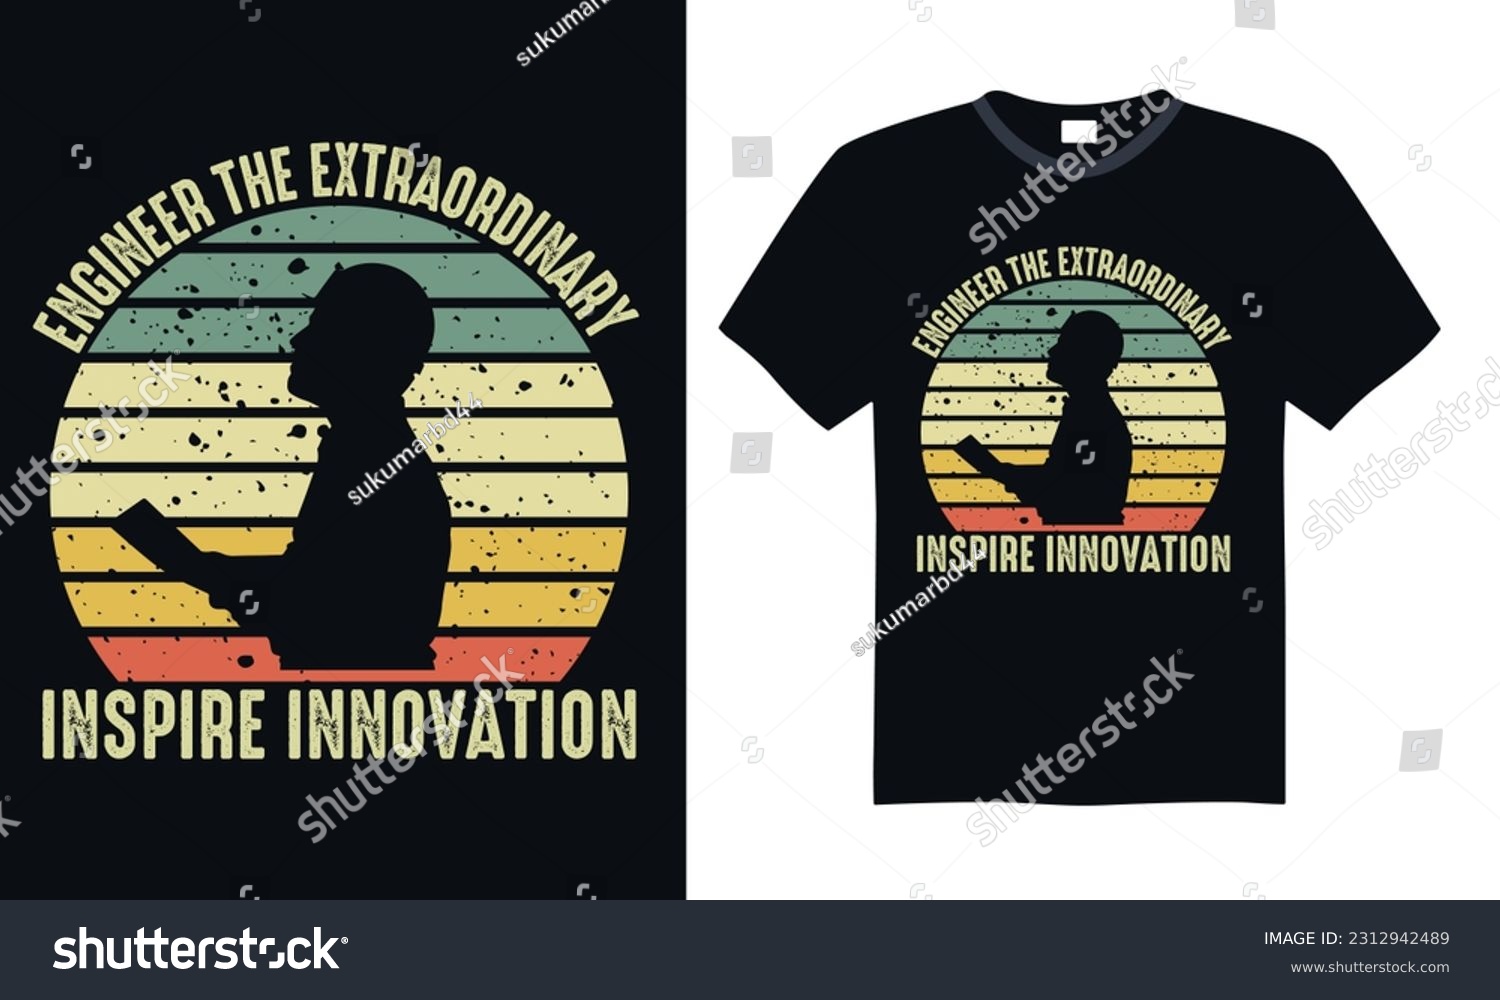 SVG of Engineer the Extraordinary Inspire Innovation - Engineering T-shirt Design, SVG Files for Cutting, Handmade calligraphy vector illustration, Hand written vector sign svg